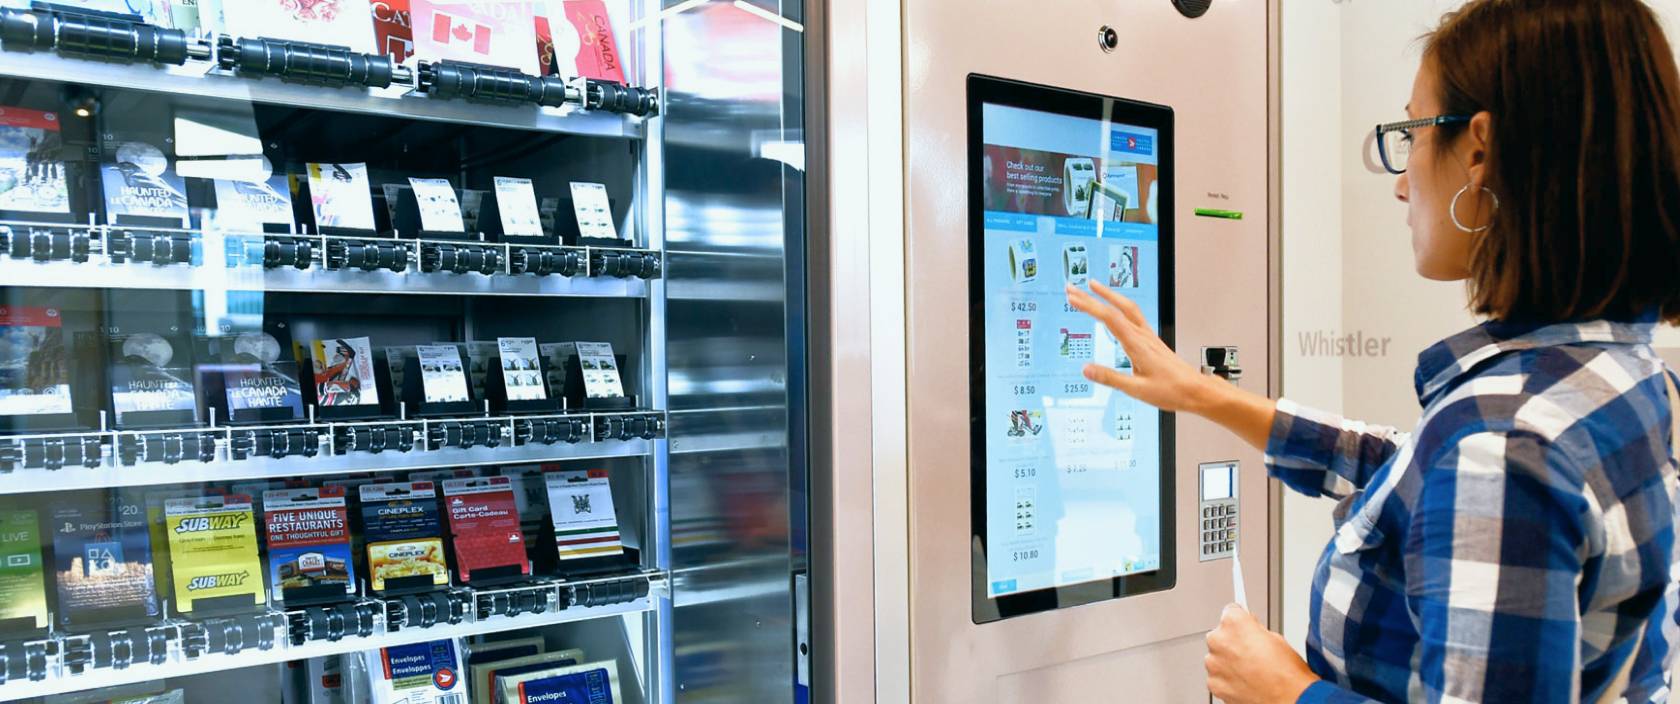 A woman uses a touchscreen to purchase a gift card from a Canada Post self-serve vending machine.